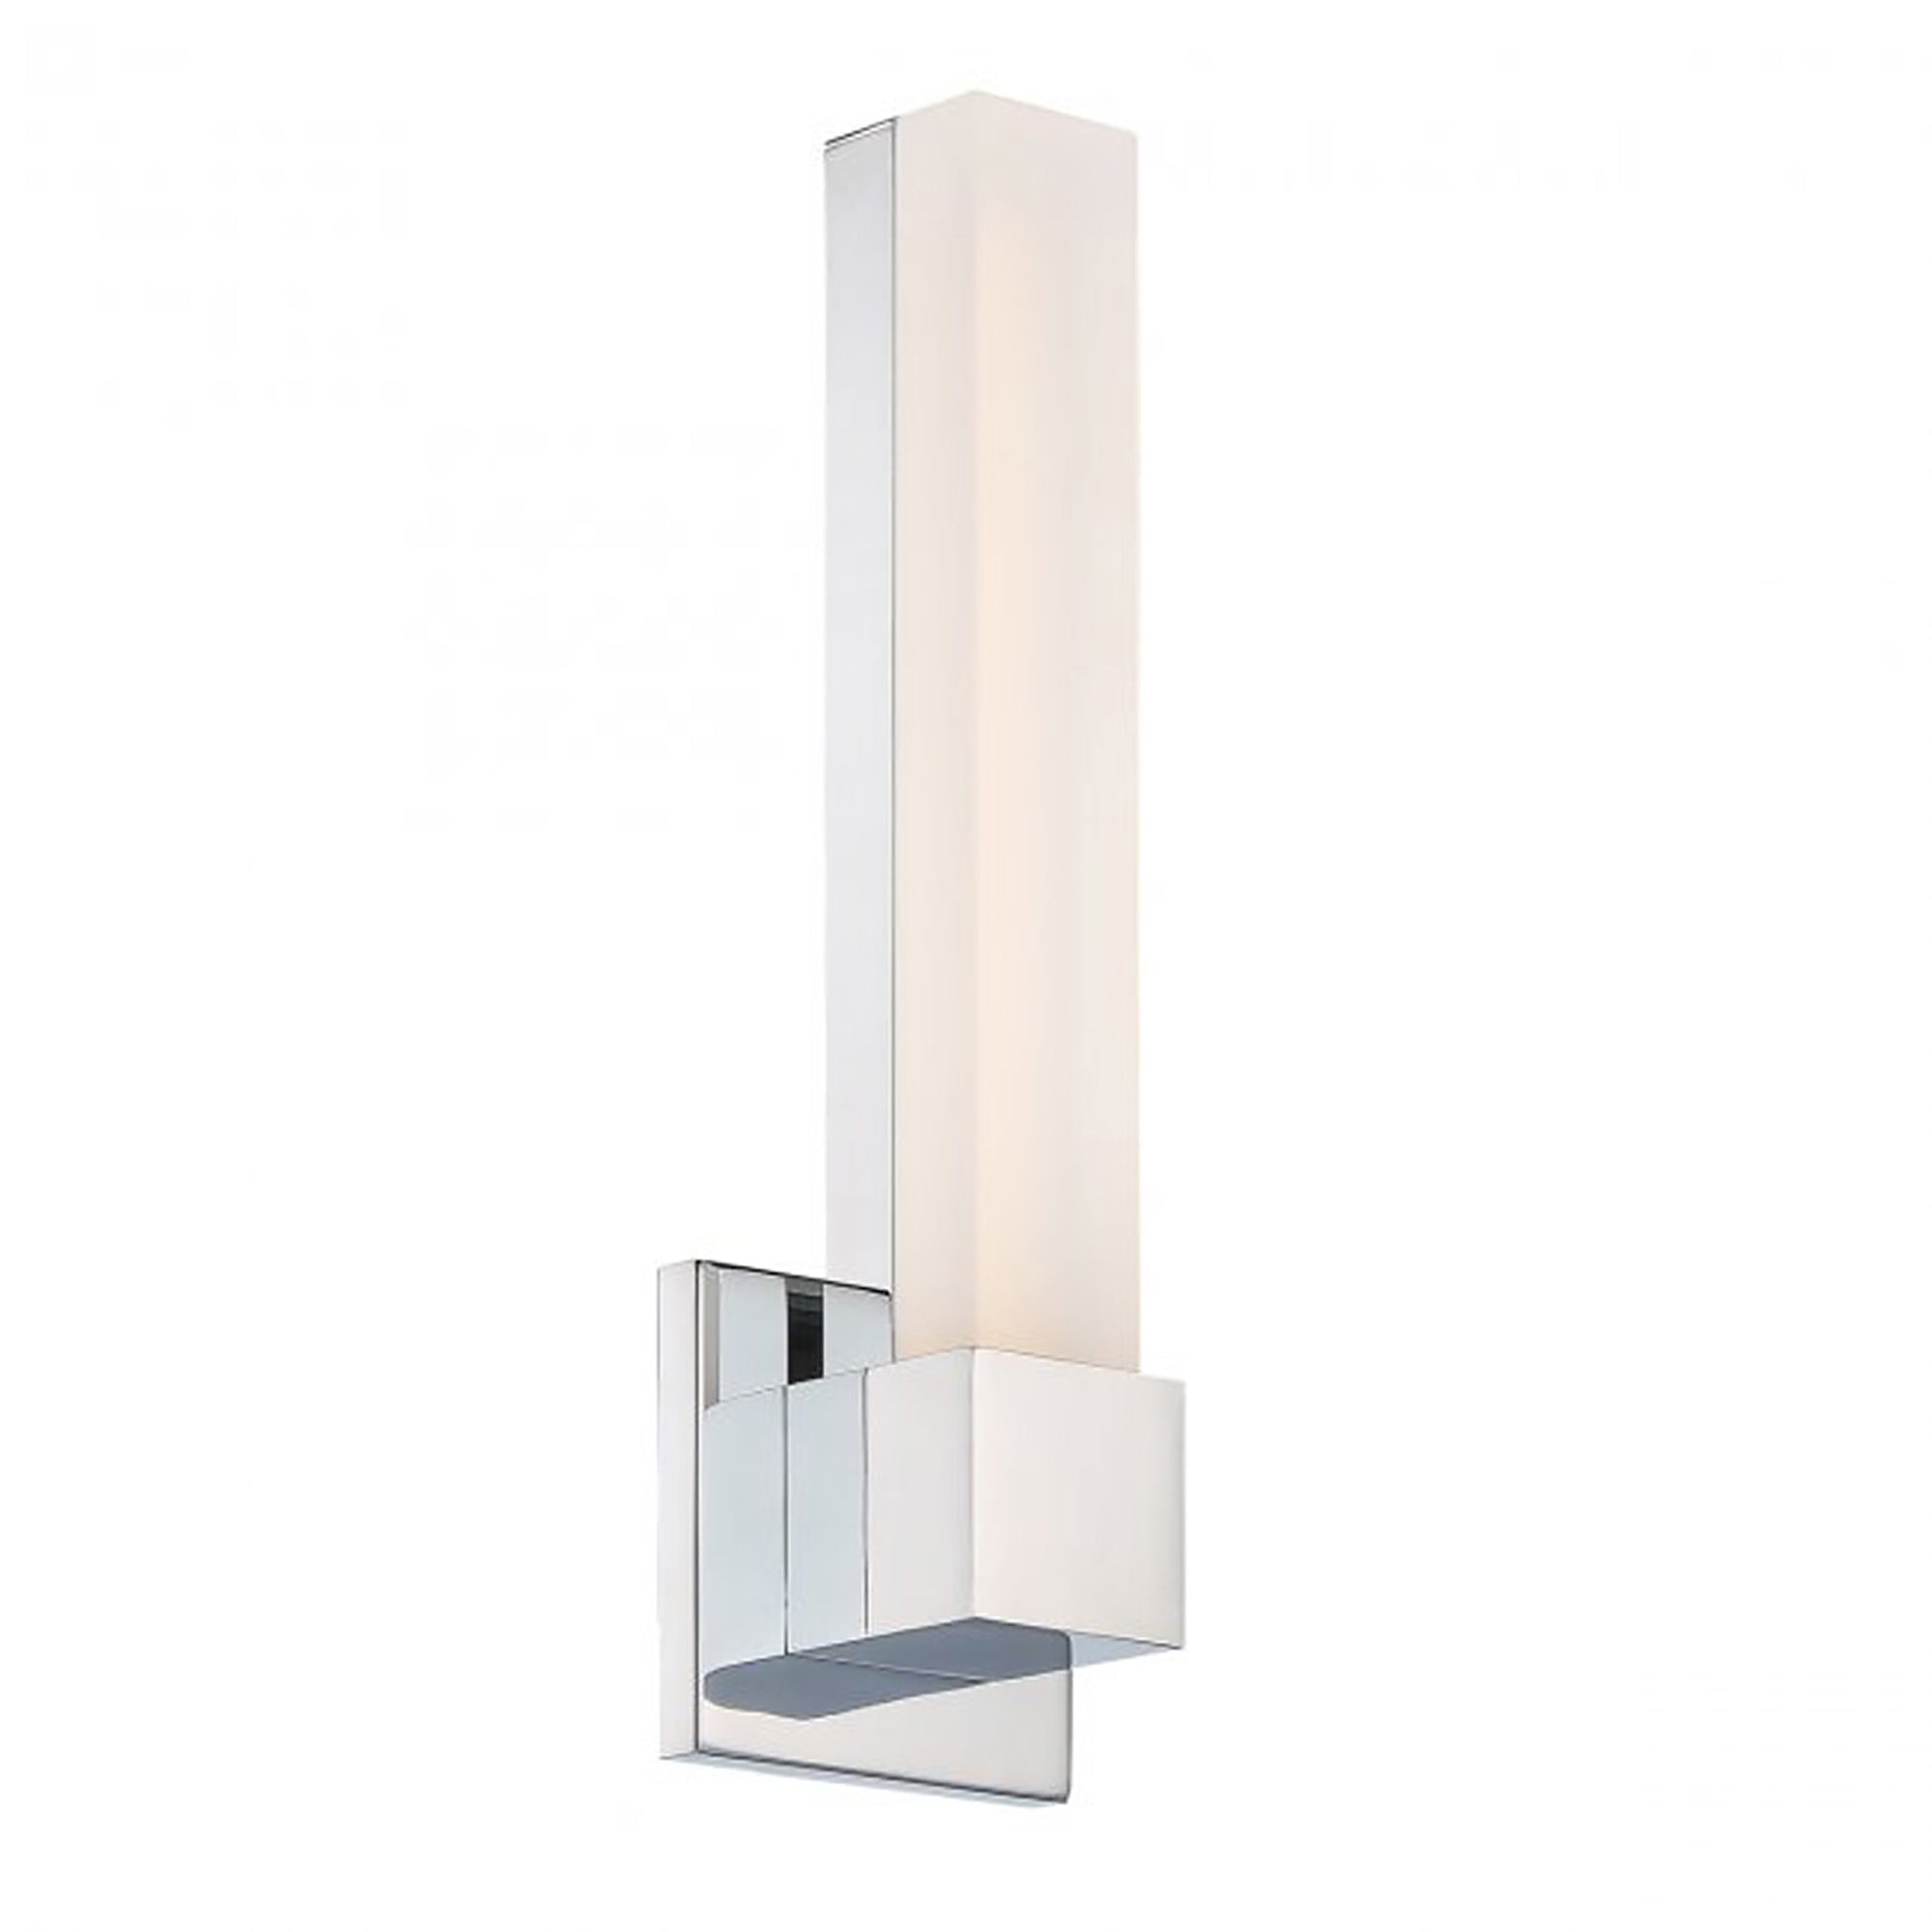 Esprit 15" LED Wall Sconce